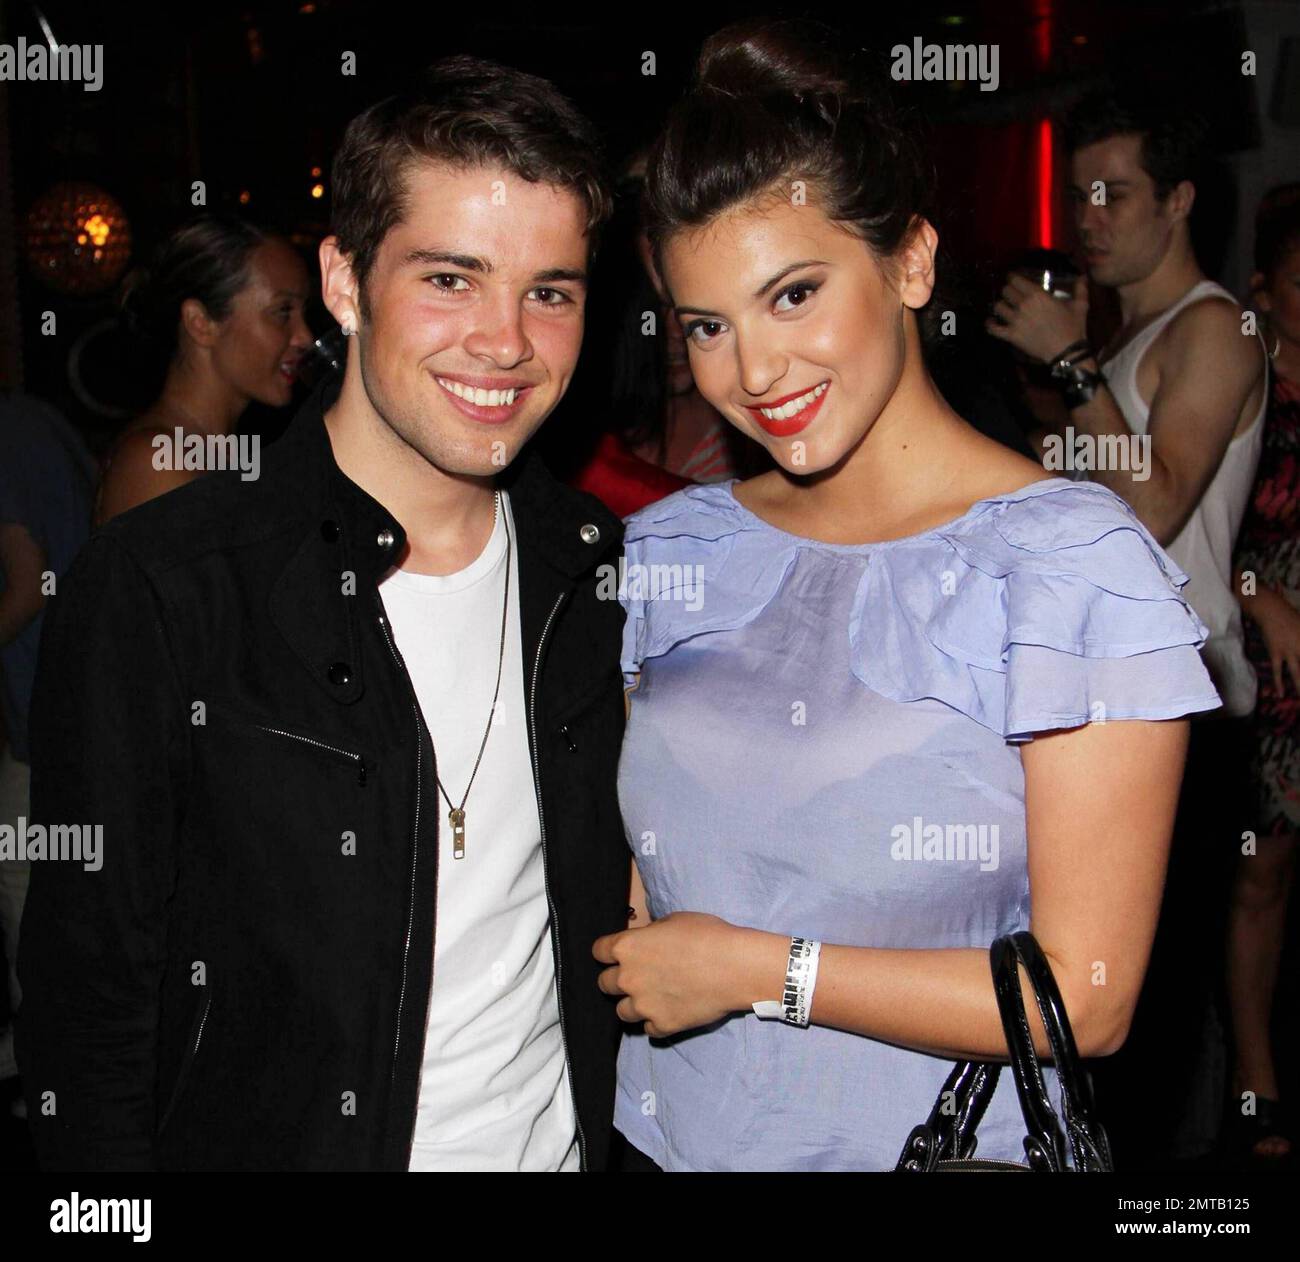 British model and former contestant on 'The X Factor', Joe McElderry and English model and media personality Francoise Boufhal attend 'Perez Hilton's One Night In London' event held at at Indigo at O2 Arena.  The event saw several musicians hit the stage to perform live, often in very interesting costumes. London, UK. 07/03/10. Stock Photo